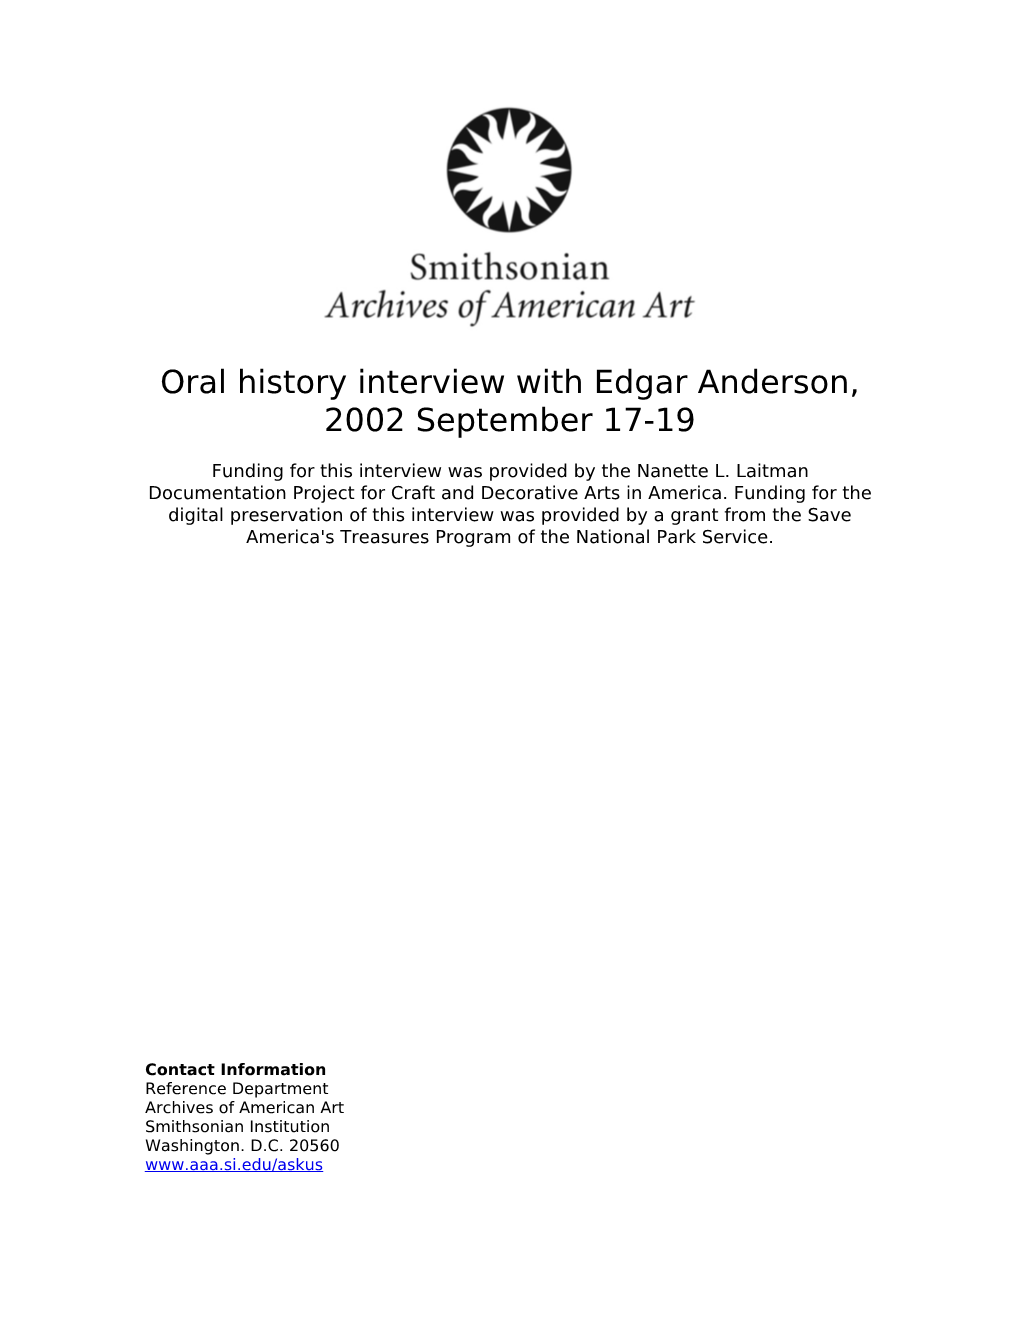 Oral History Interview with Edgar Anderson, 2002 September 17-19